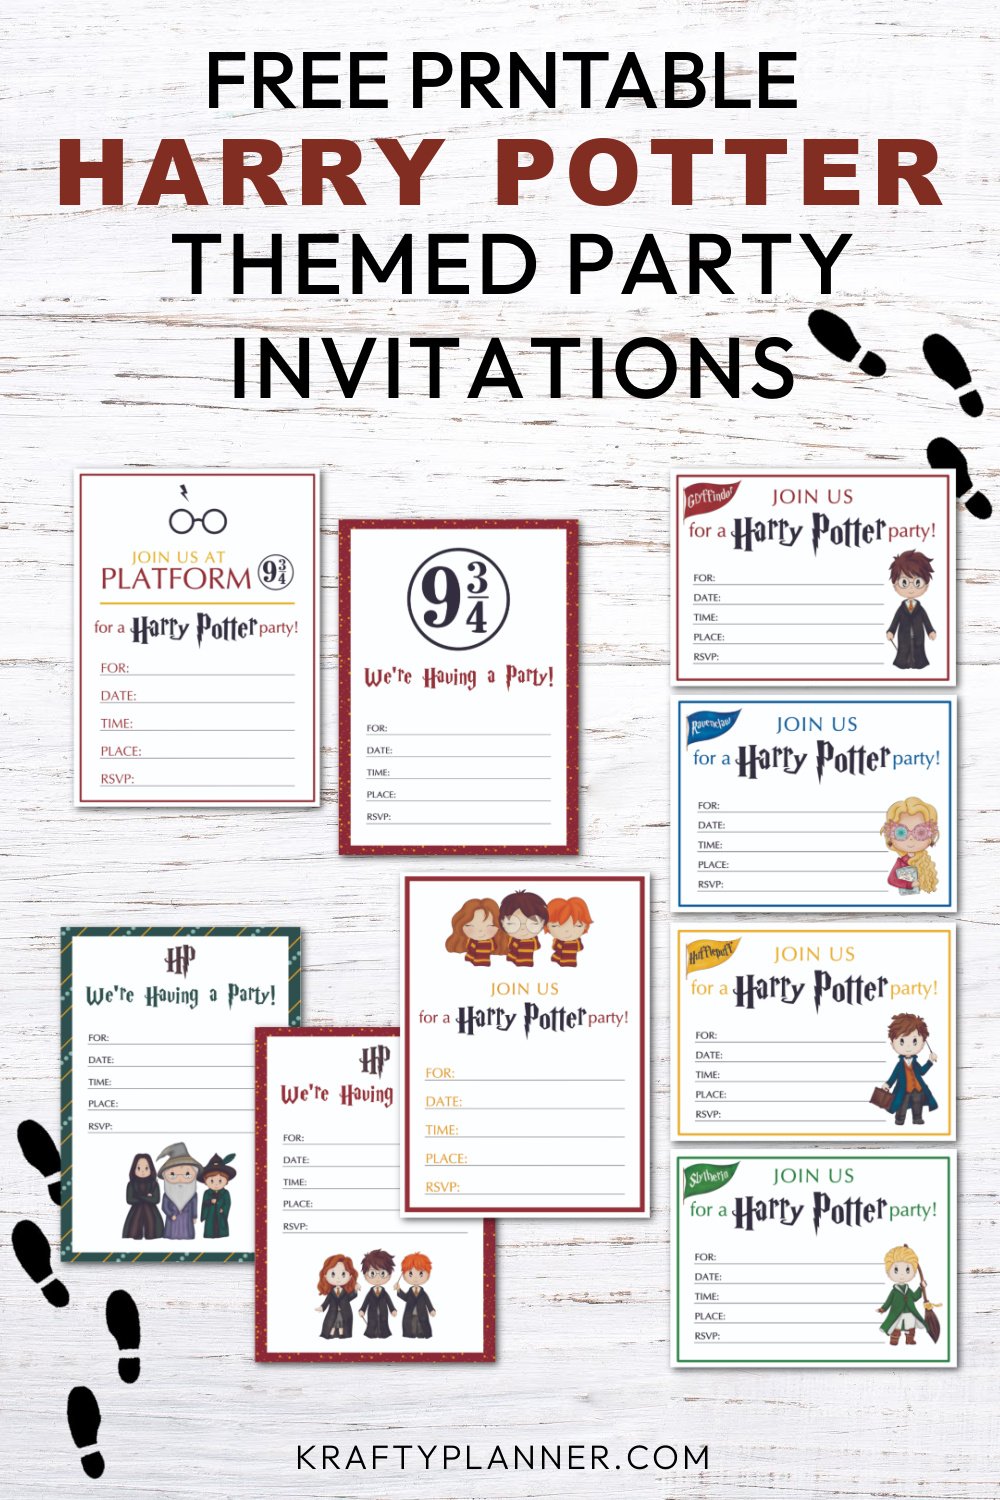 Free Printable Harry Potter Themed Party Invitations